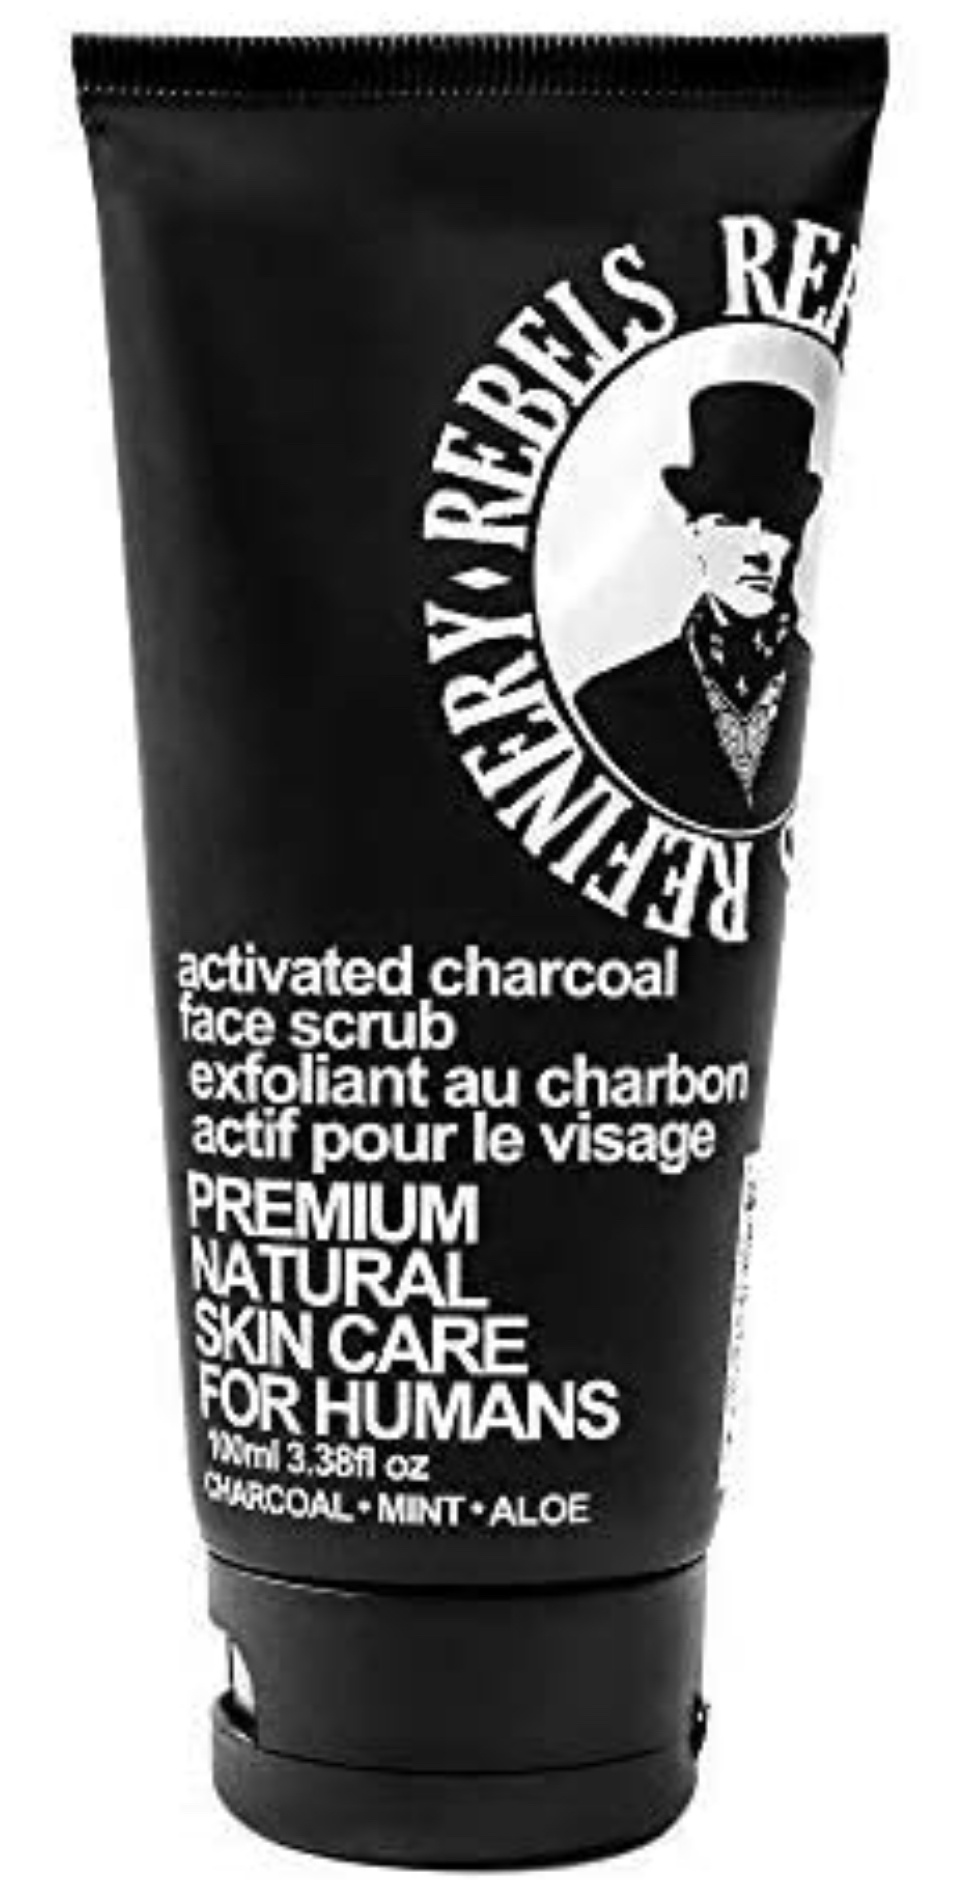 Rebels Refinery Activated Charcoal Face Scrub